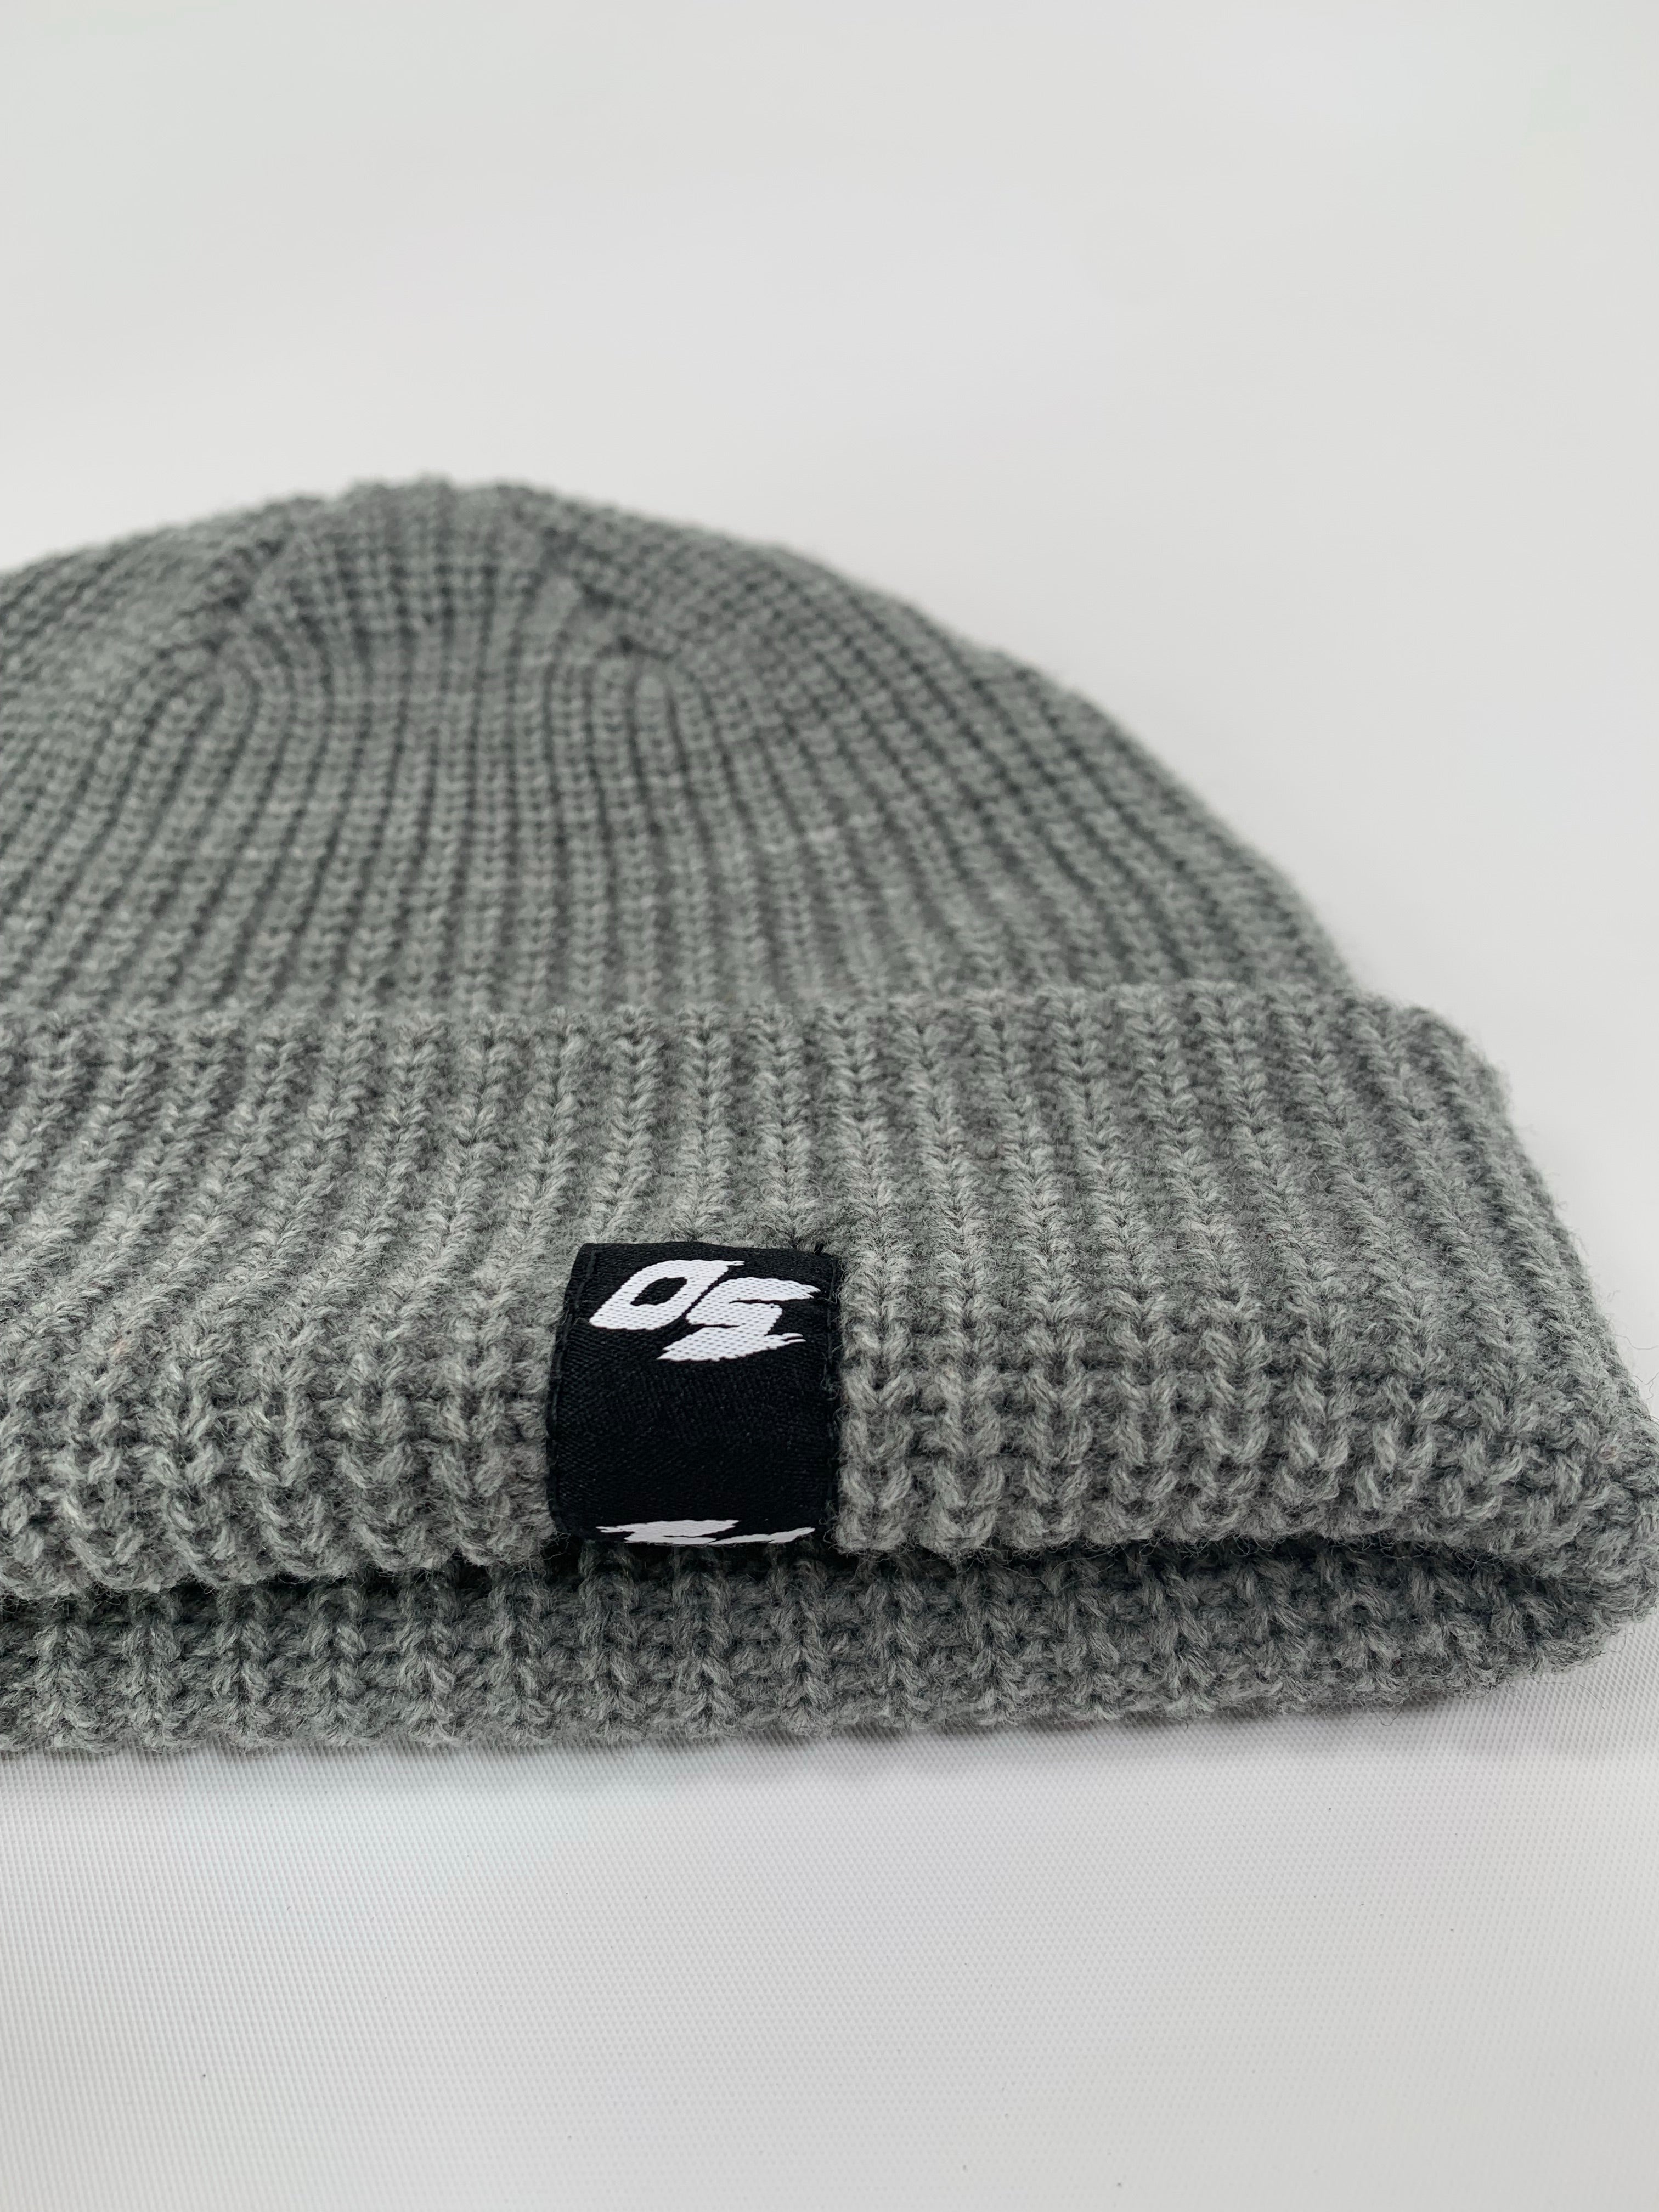 OS® CABLE BEANIE- grey – OTSDR SPORTS